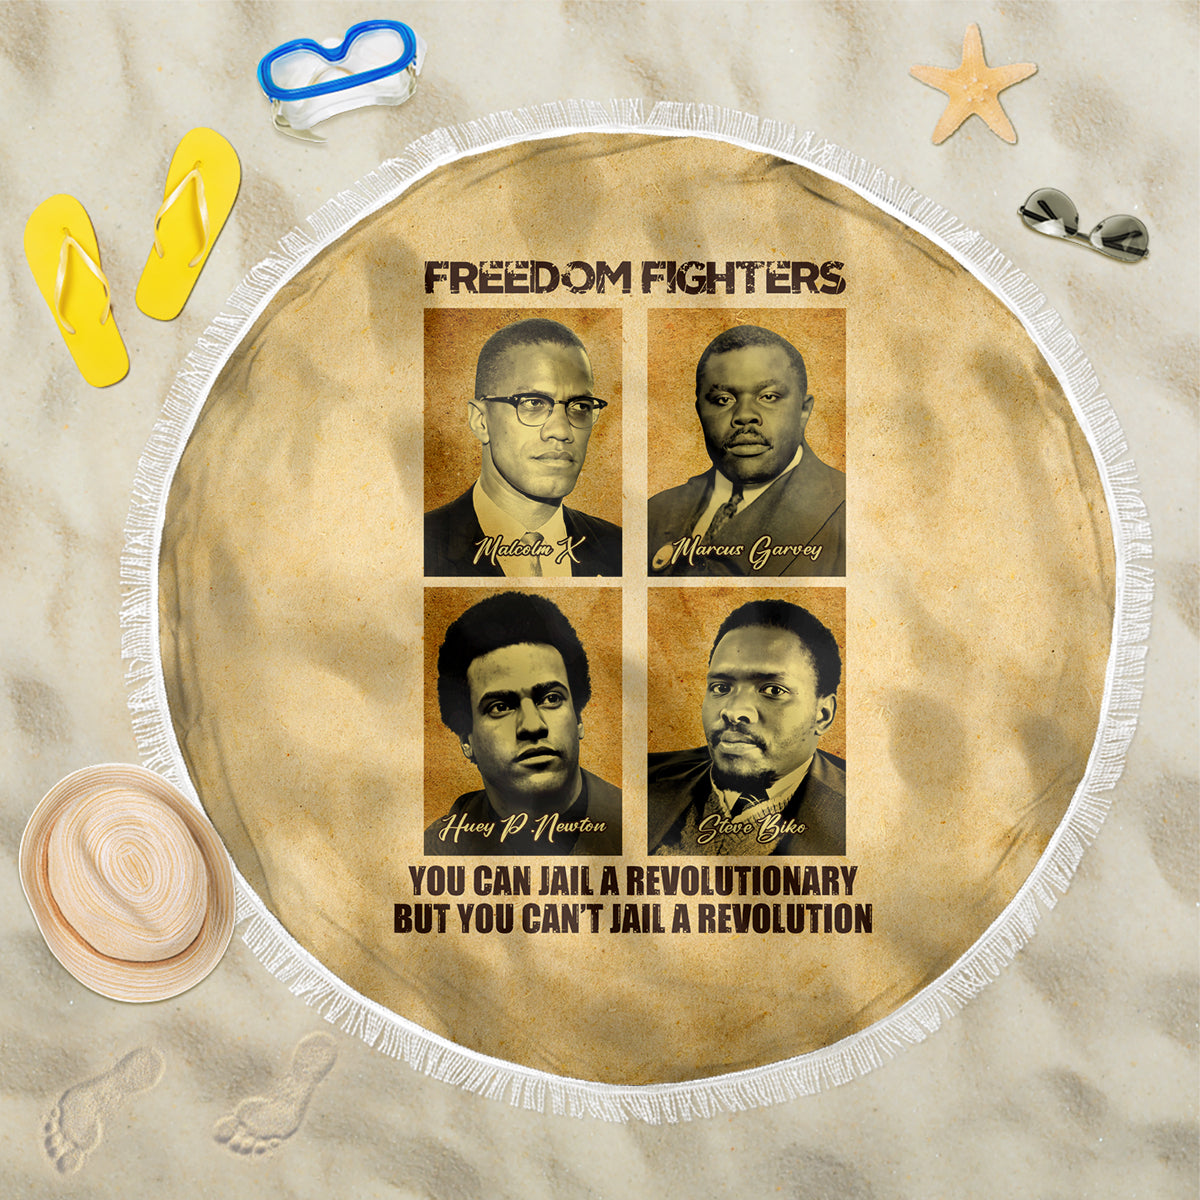 Freedom Fighters Beach Blanket Civil Rights Leaders Revolution